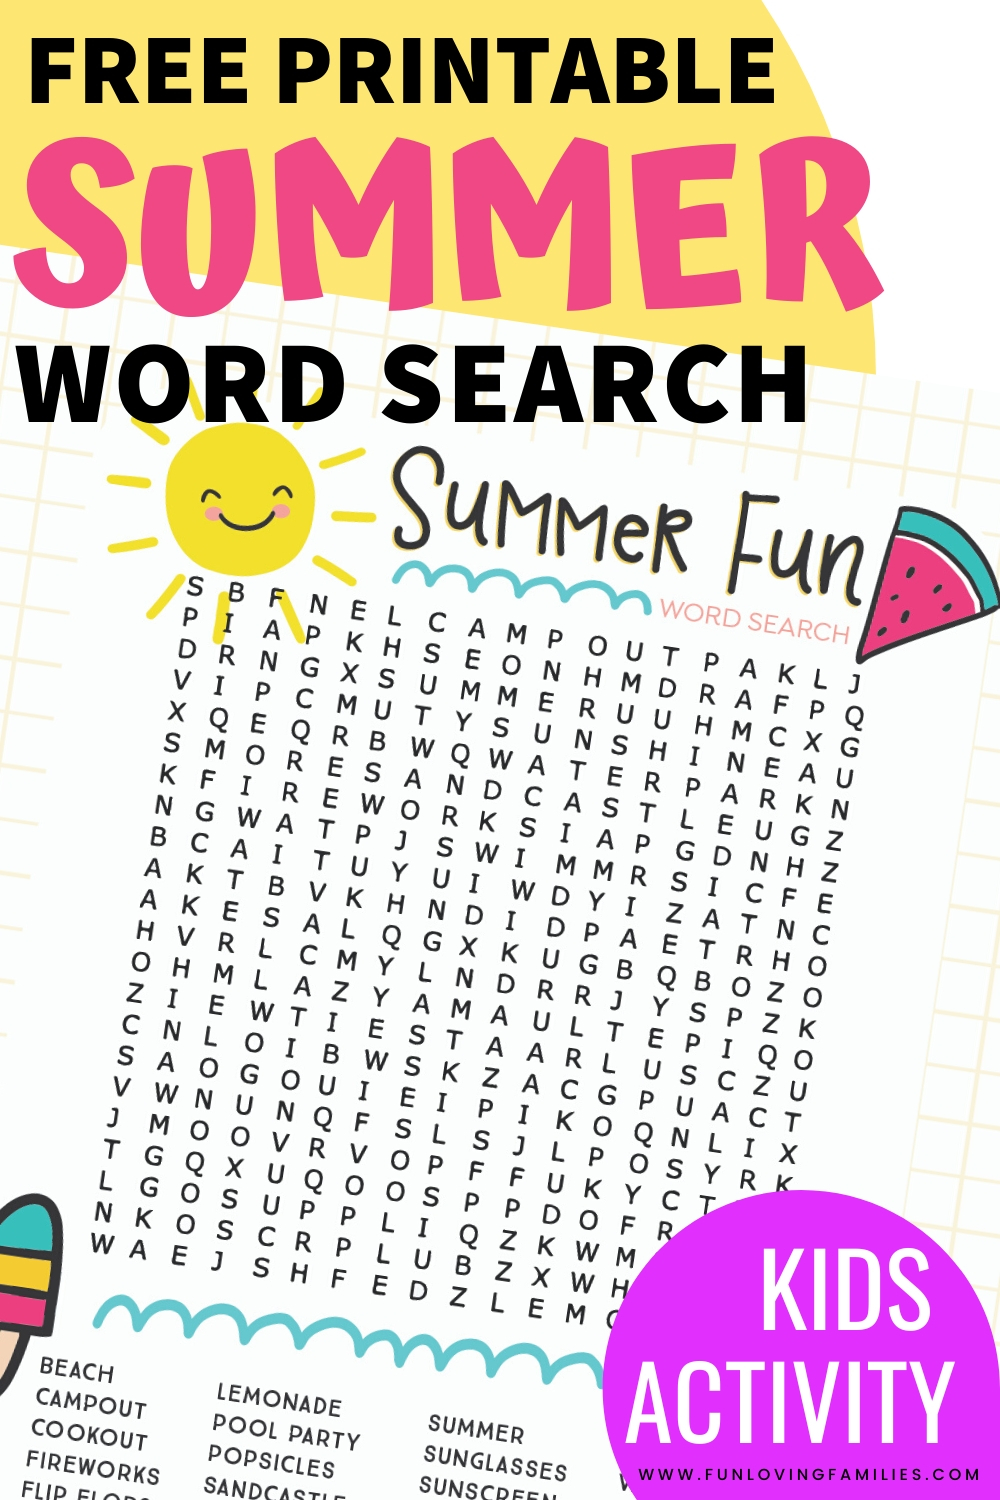 summer-word-search-free-printable-activity-fun-loving-families